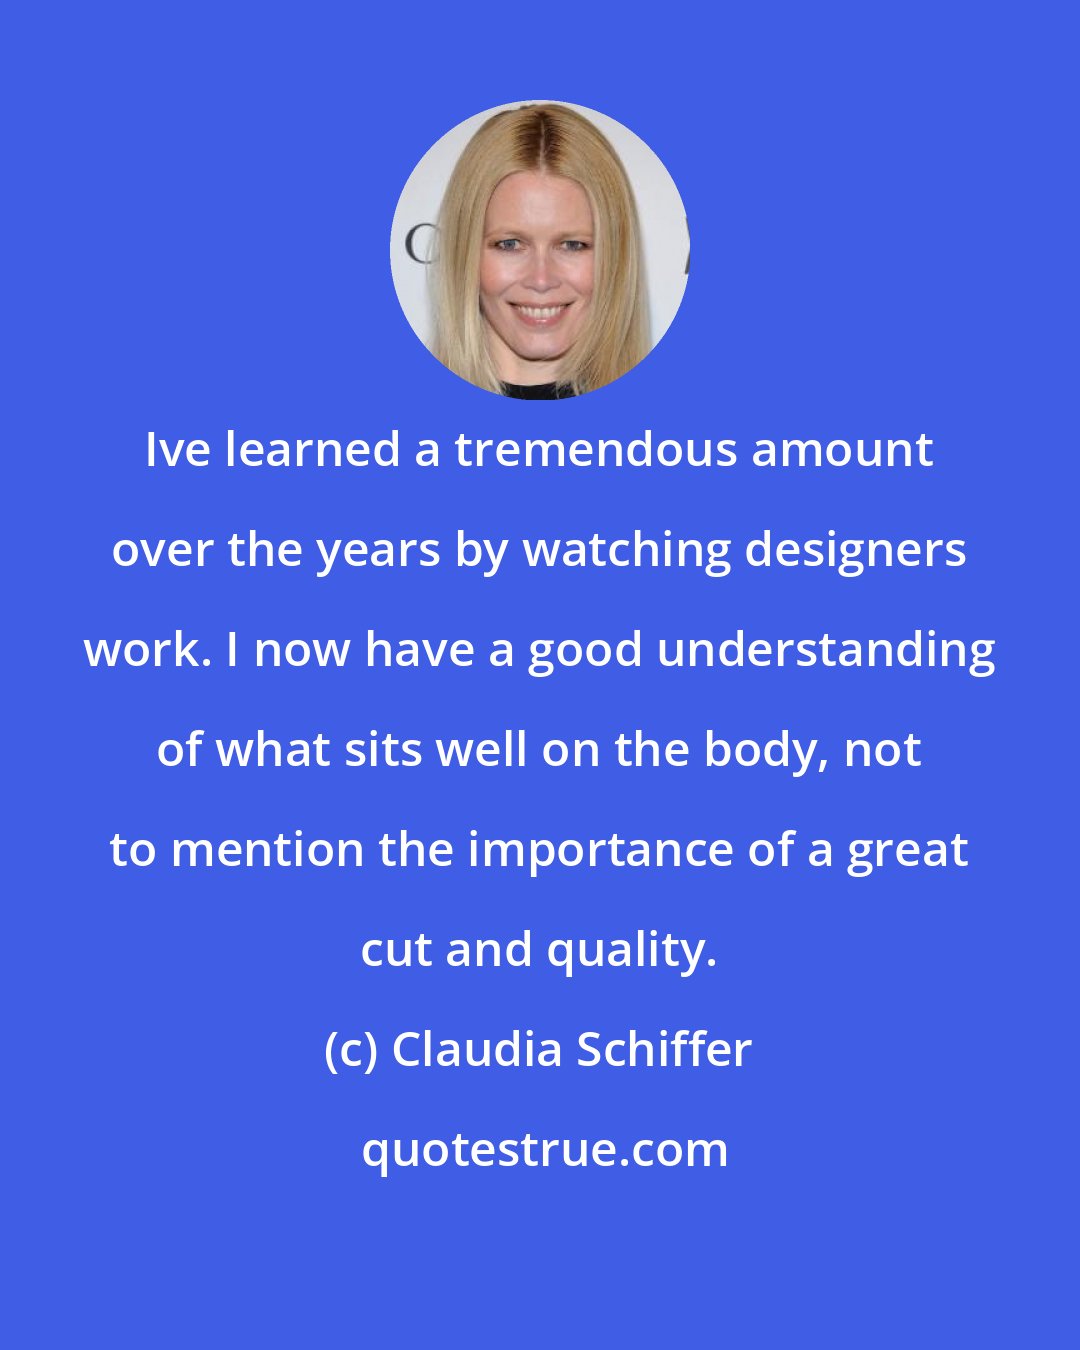 Claudia Schiffer: Ive learned a tremendous amount over the years by watching designers work. I now have a good understanding of what sits well on the body, not to mention the importance of a great cut and quality.